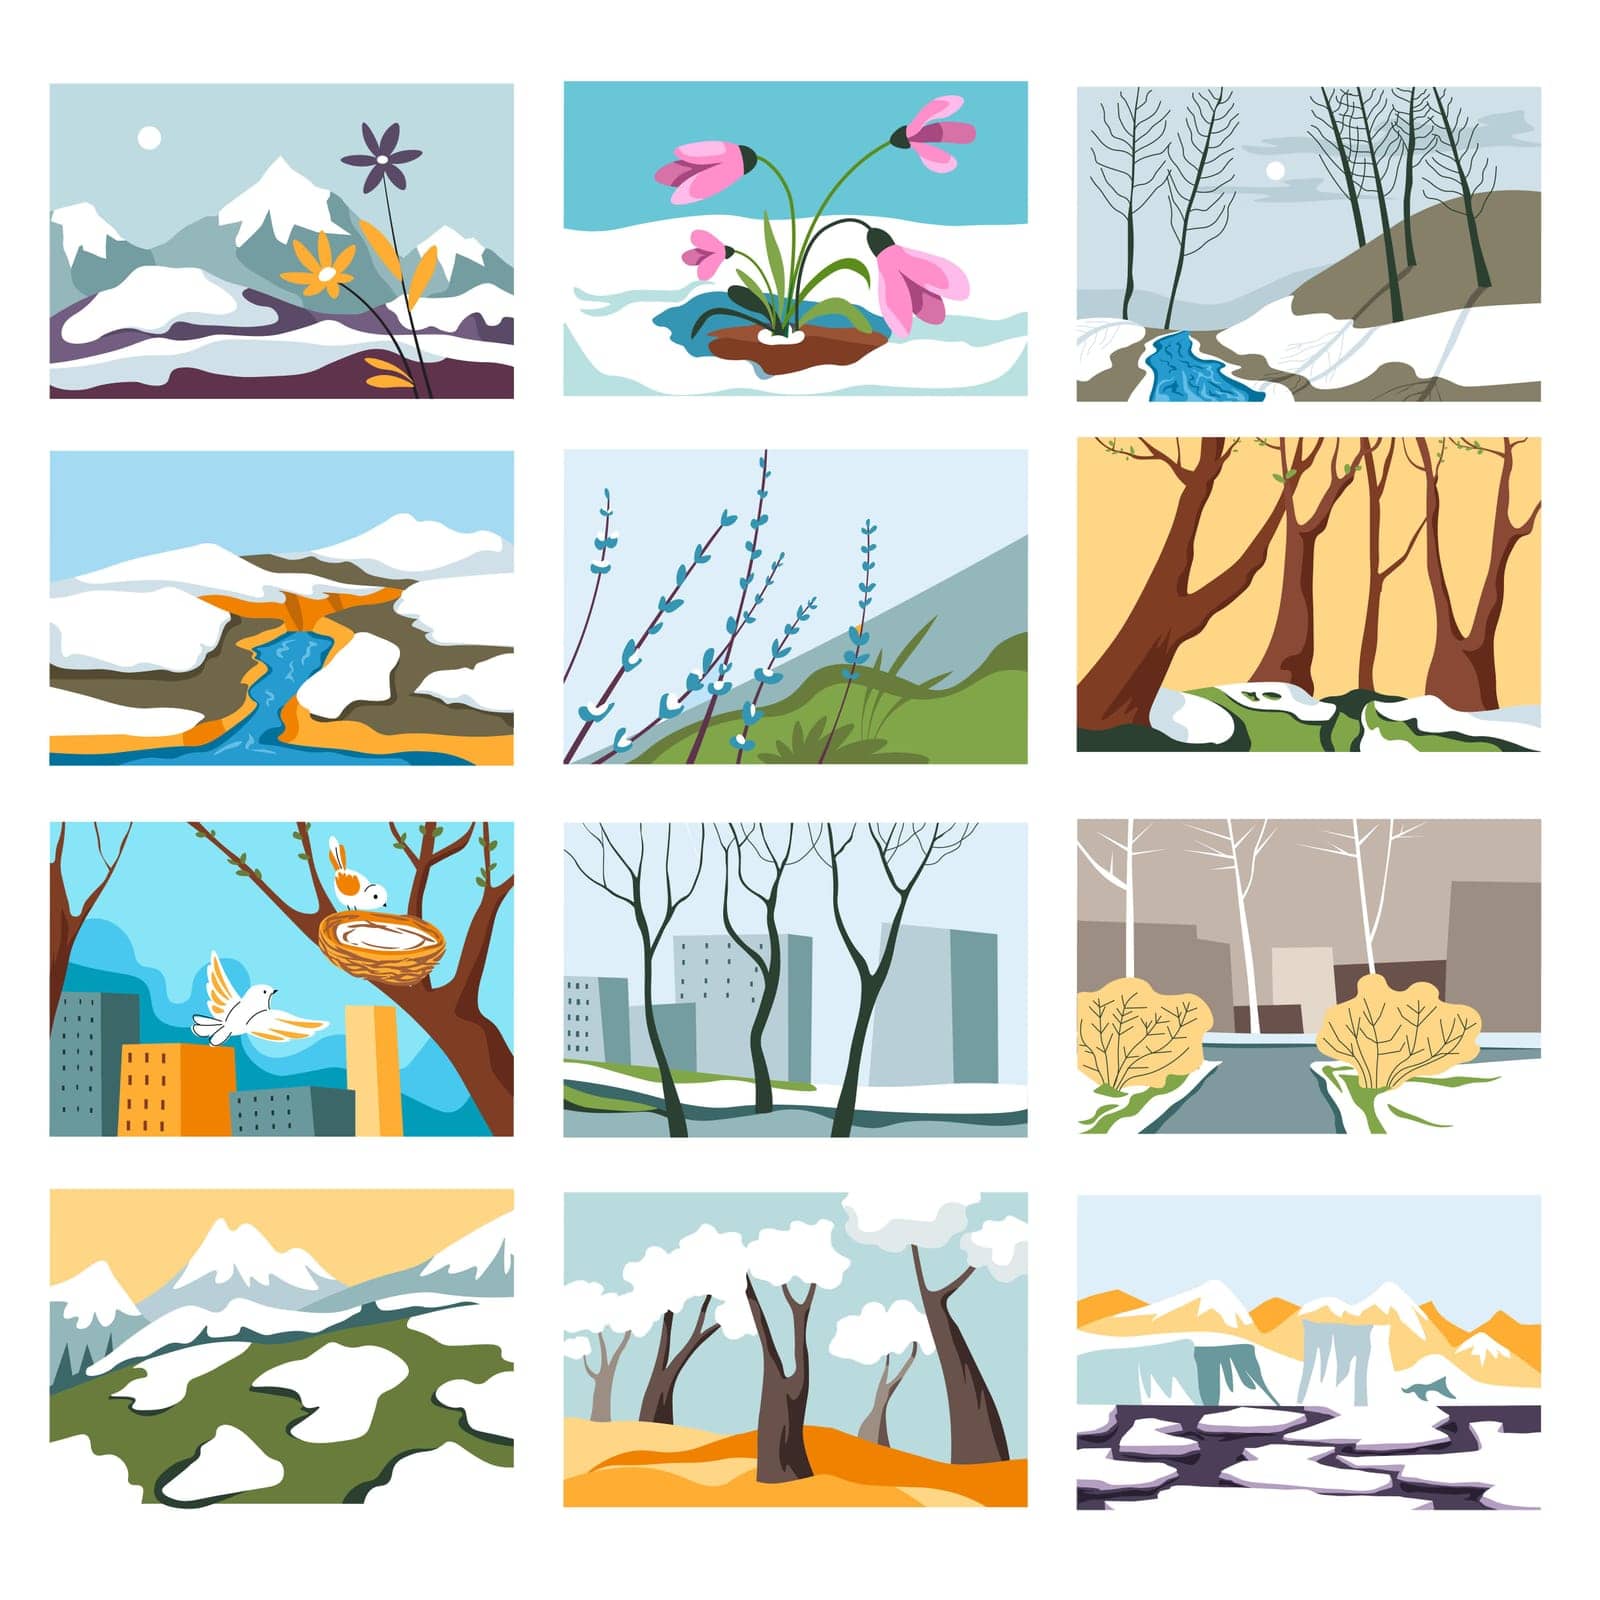 Melting snow and blooming flora, spring awakening and revival of nature. Scenery of landscapes and cityscapes. Crocus and forest with rivers and ice. Nesting birds in city. Vector in flat style